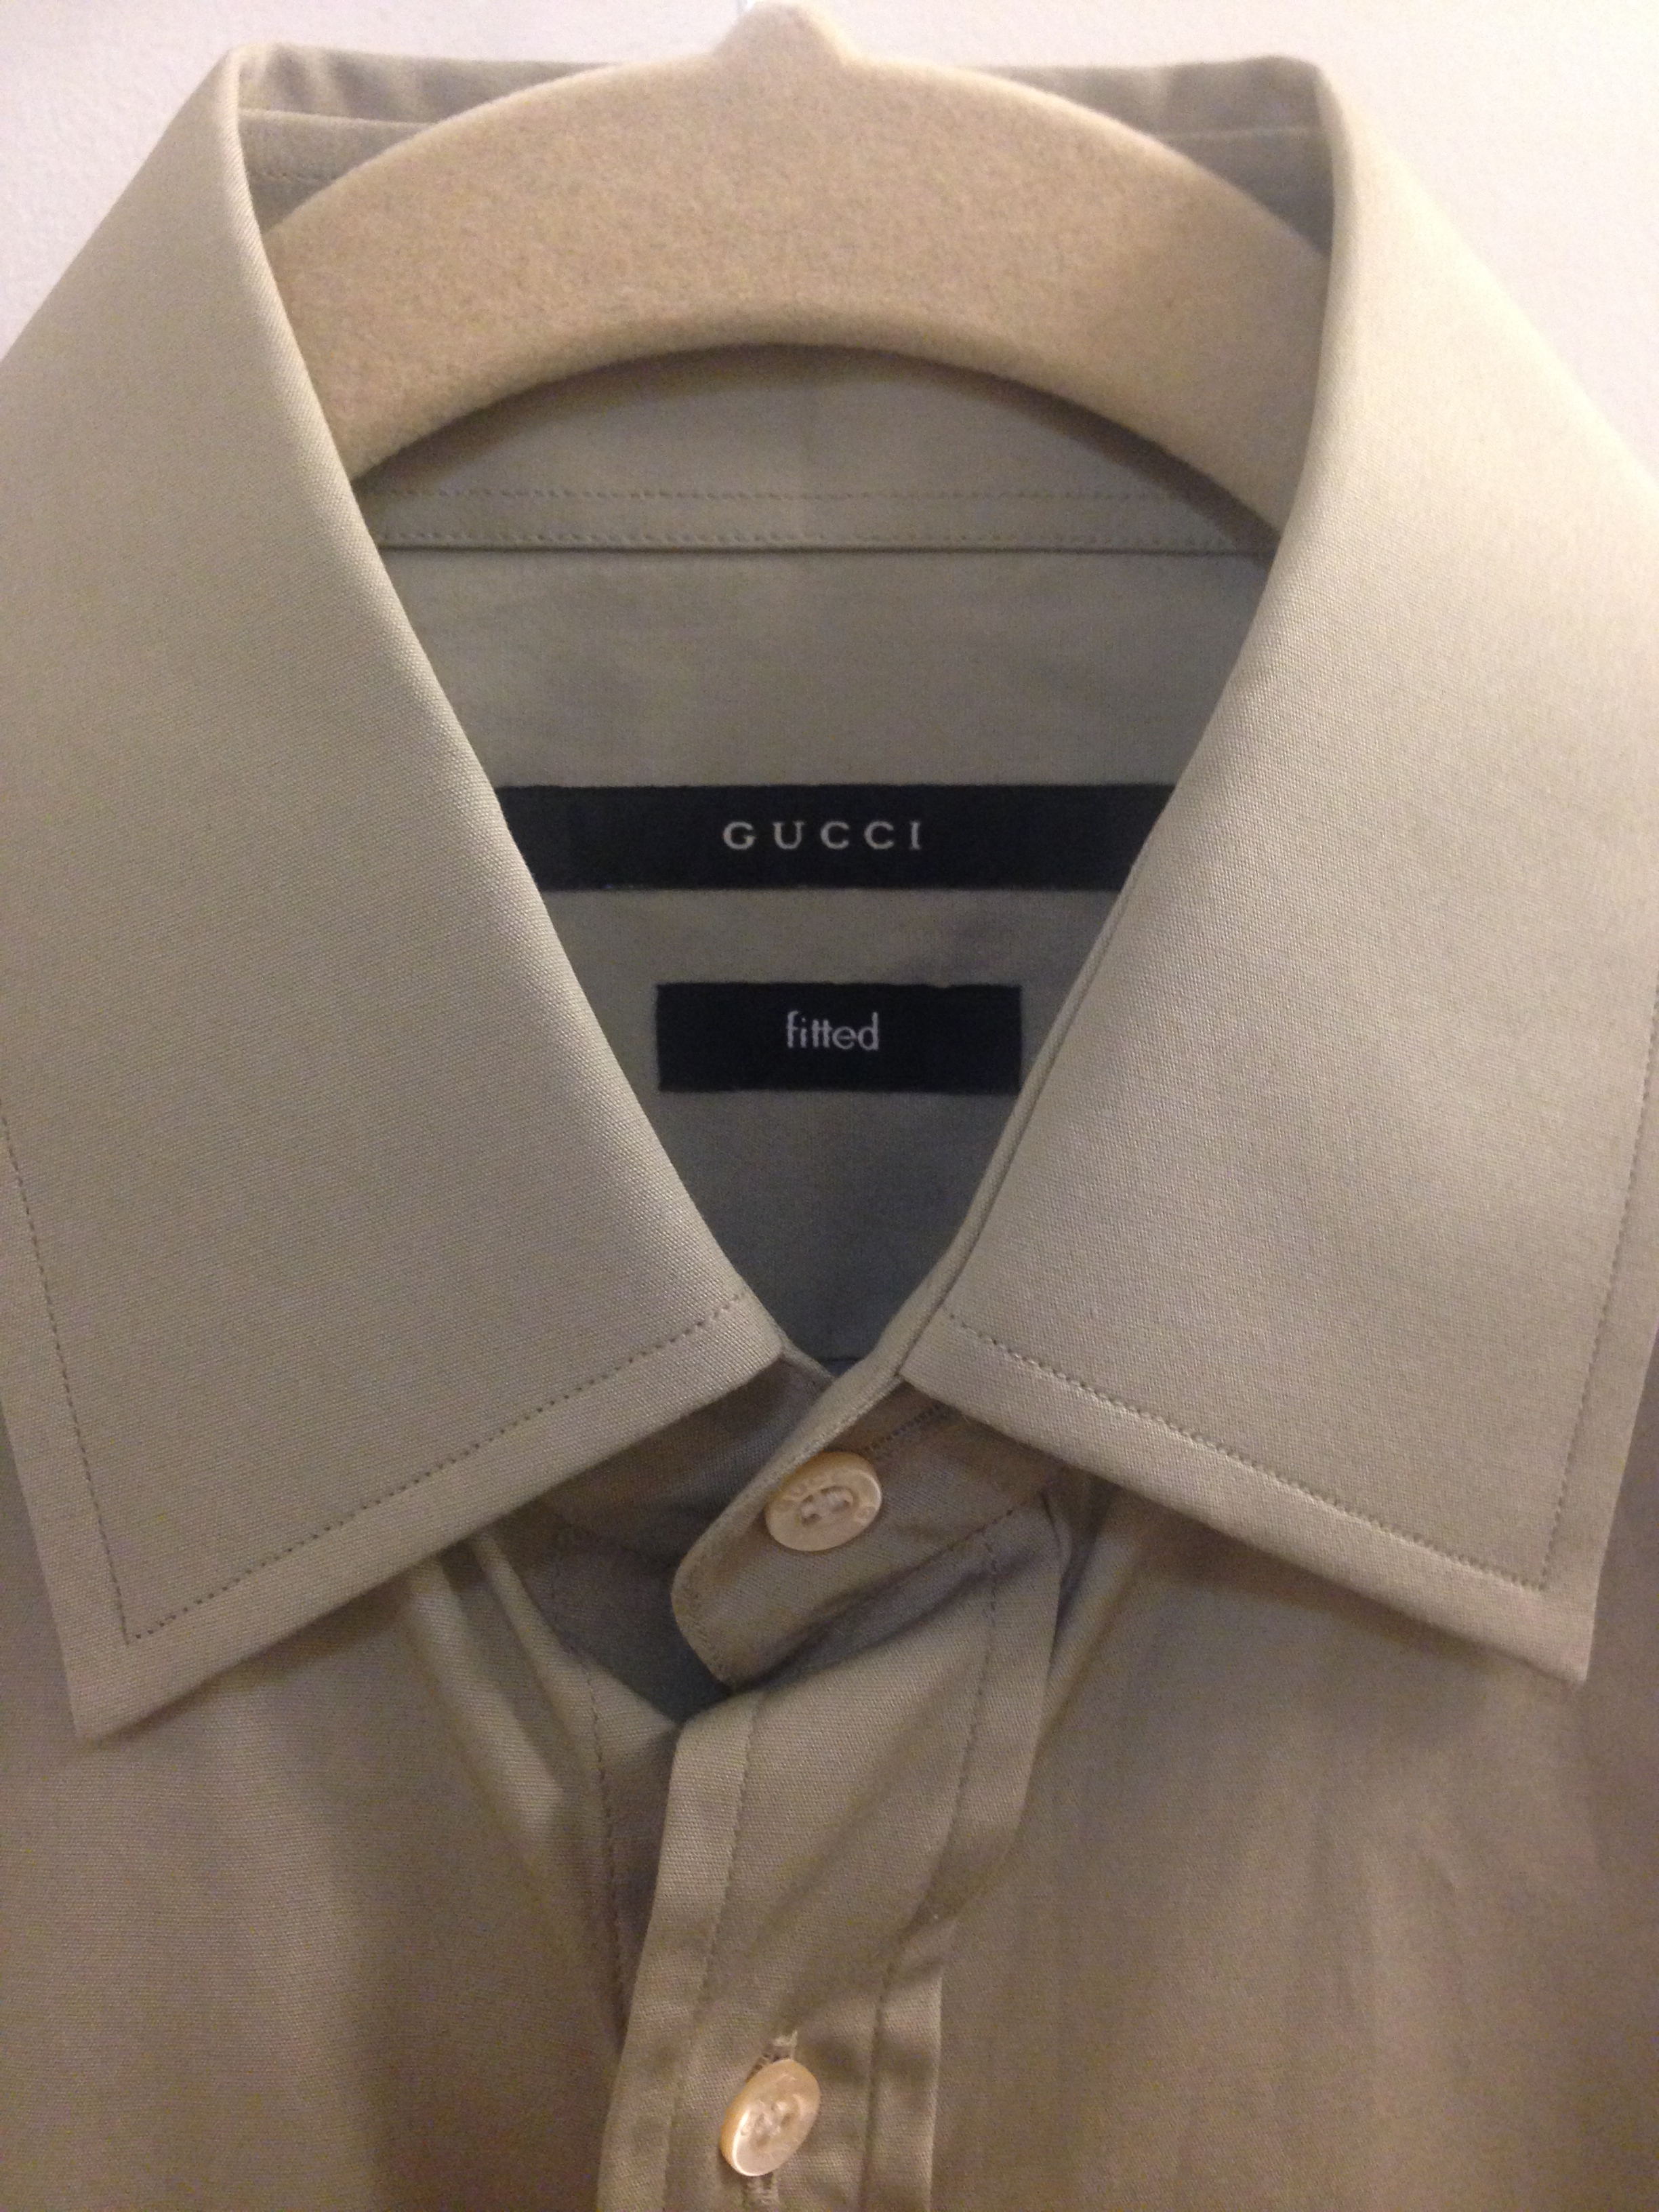 price check on gucci fitted shirt made in switzerland | Styleforum